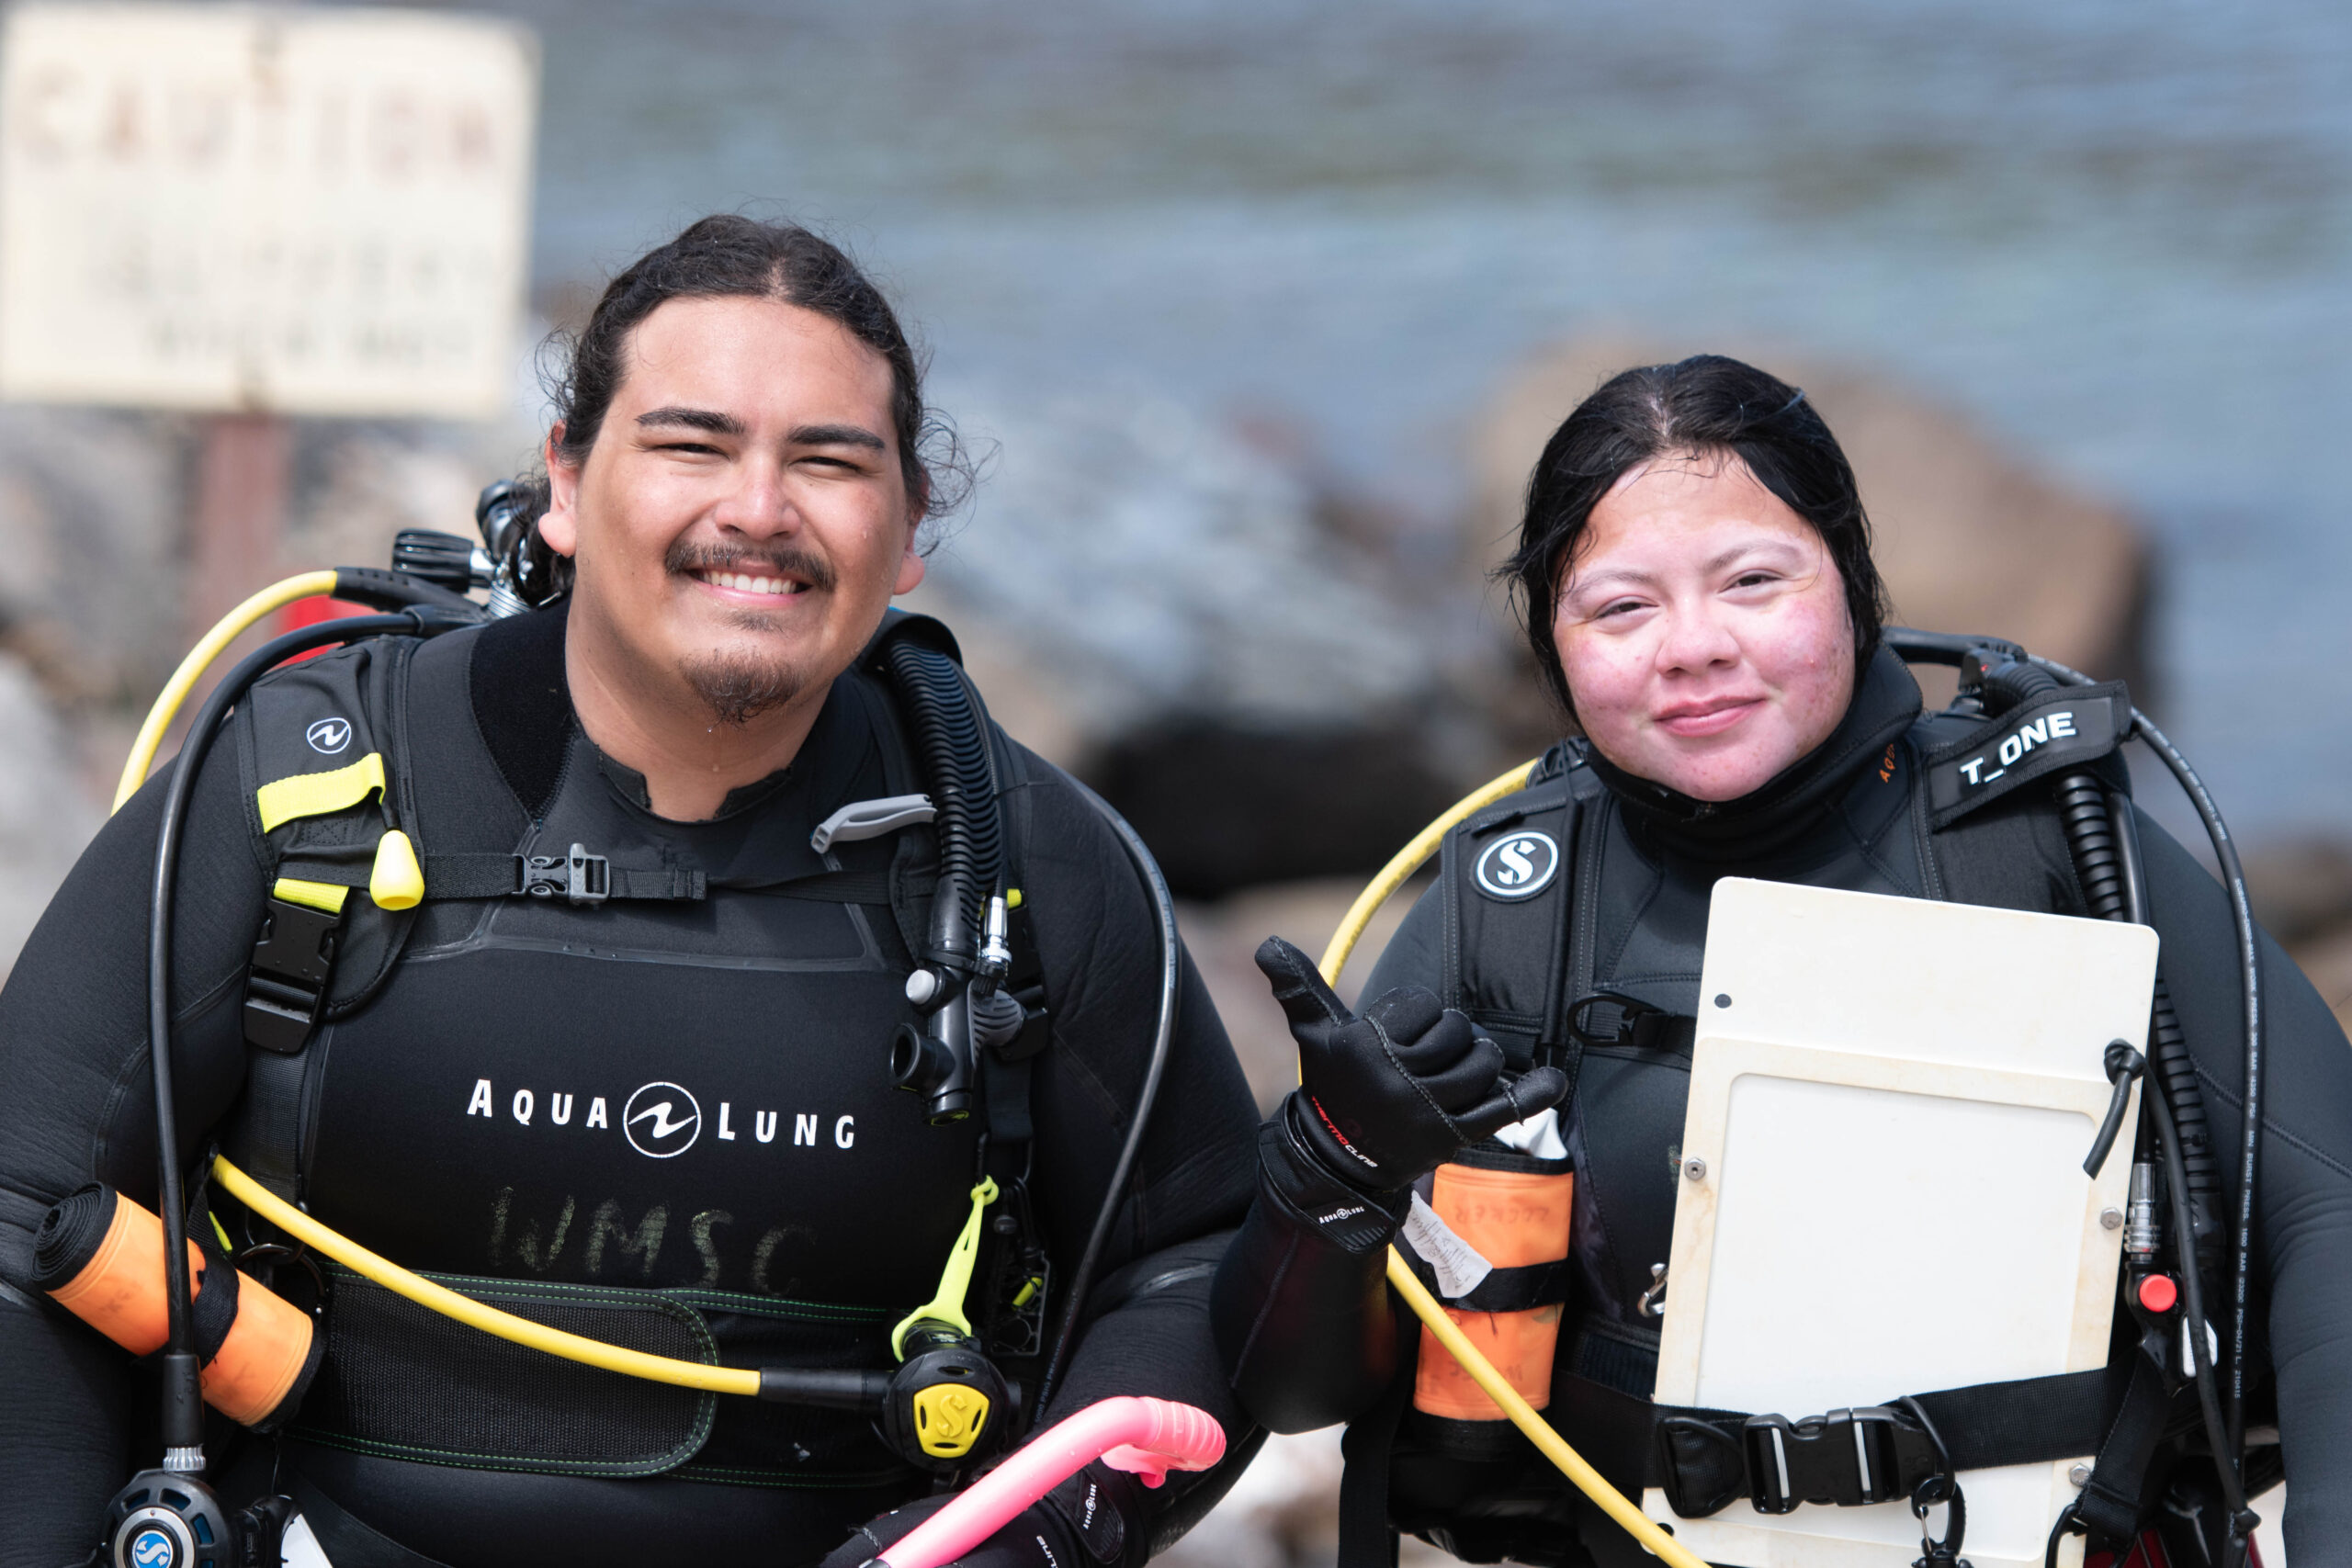 two individuals in dive gear, one holding an underwater whiteboard, stand on a dock